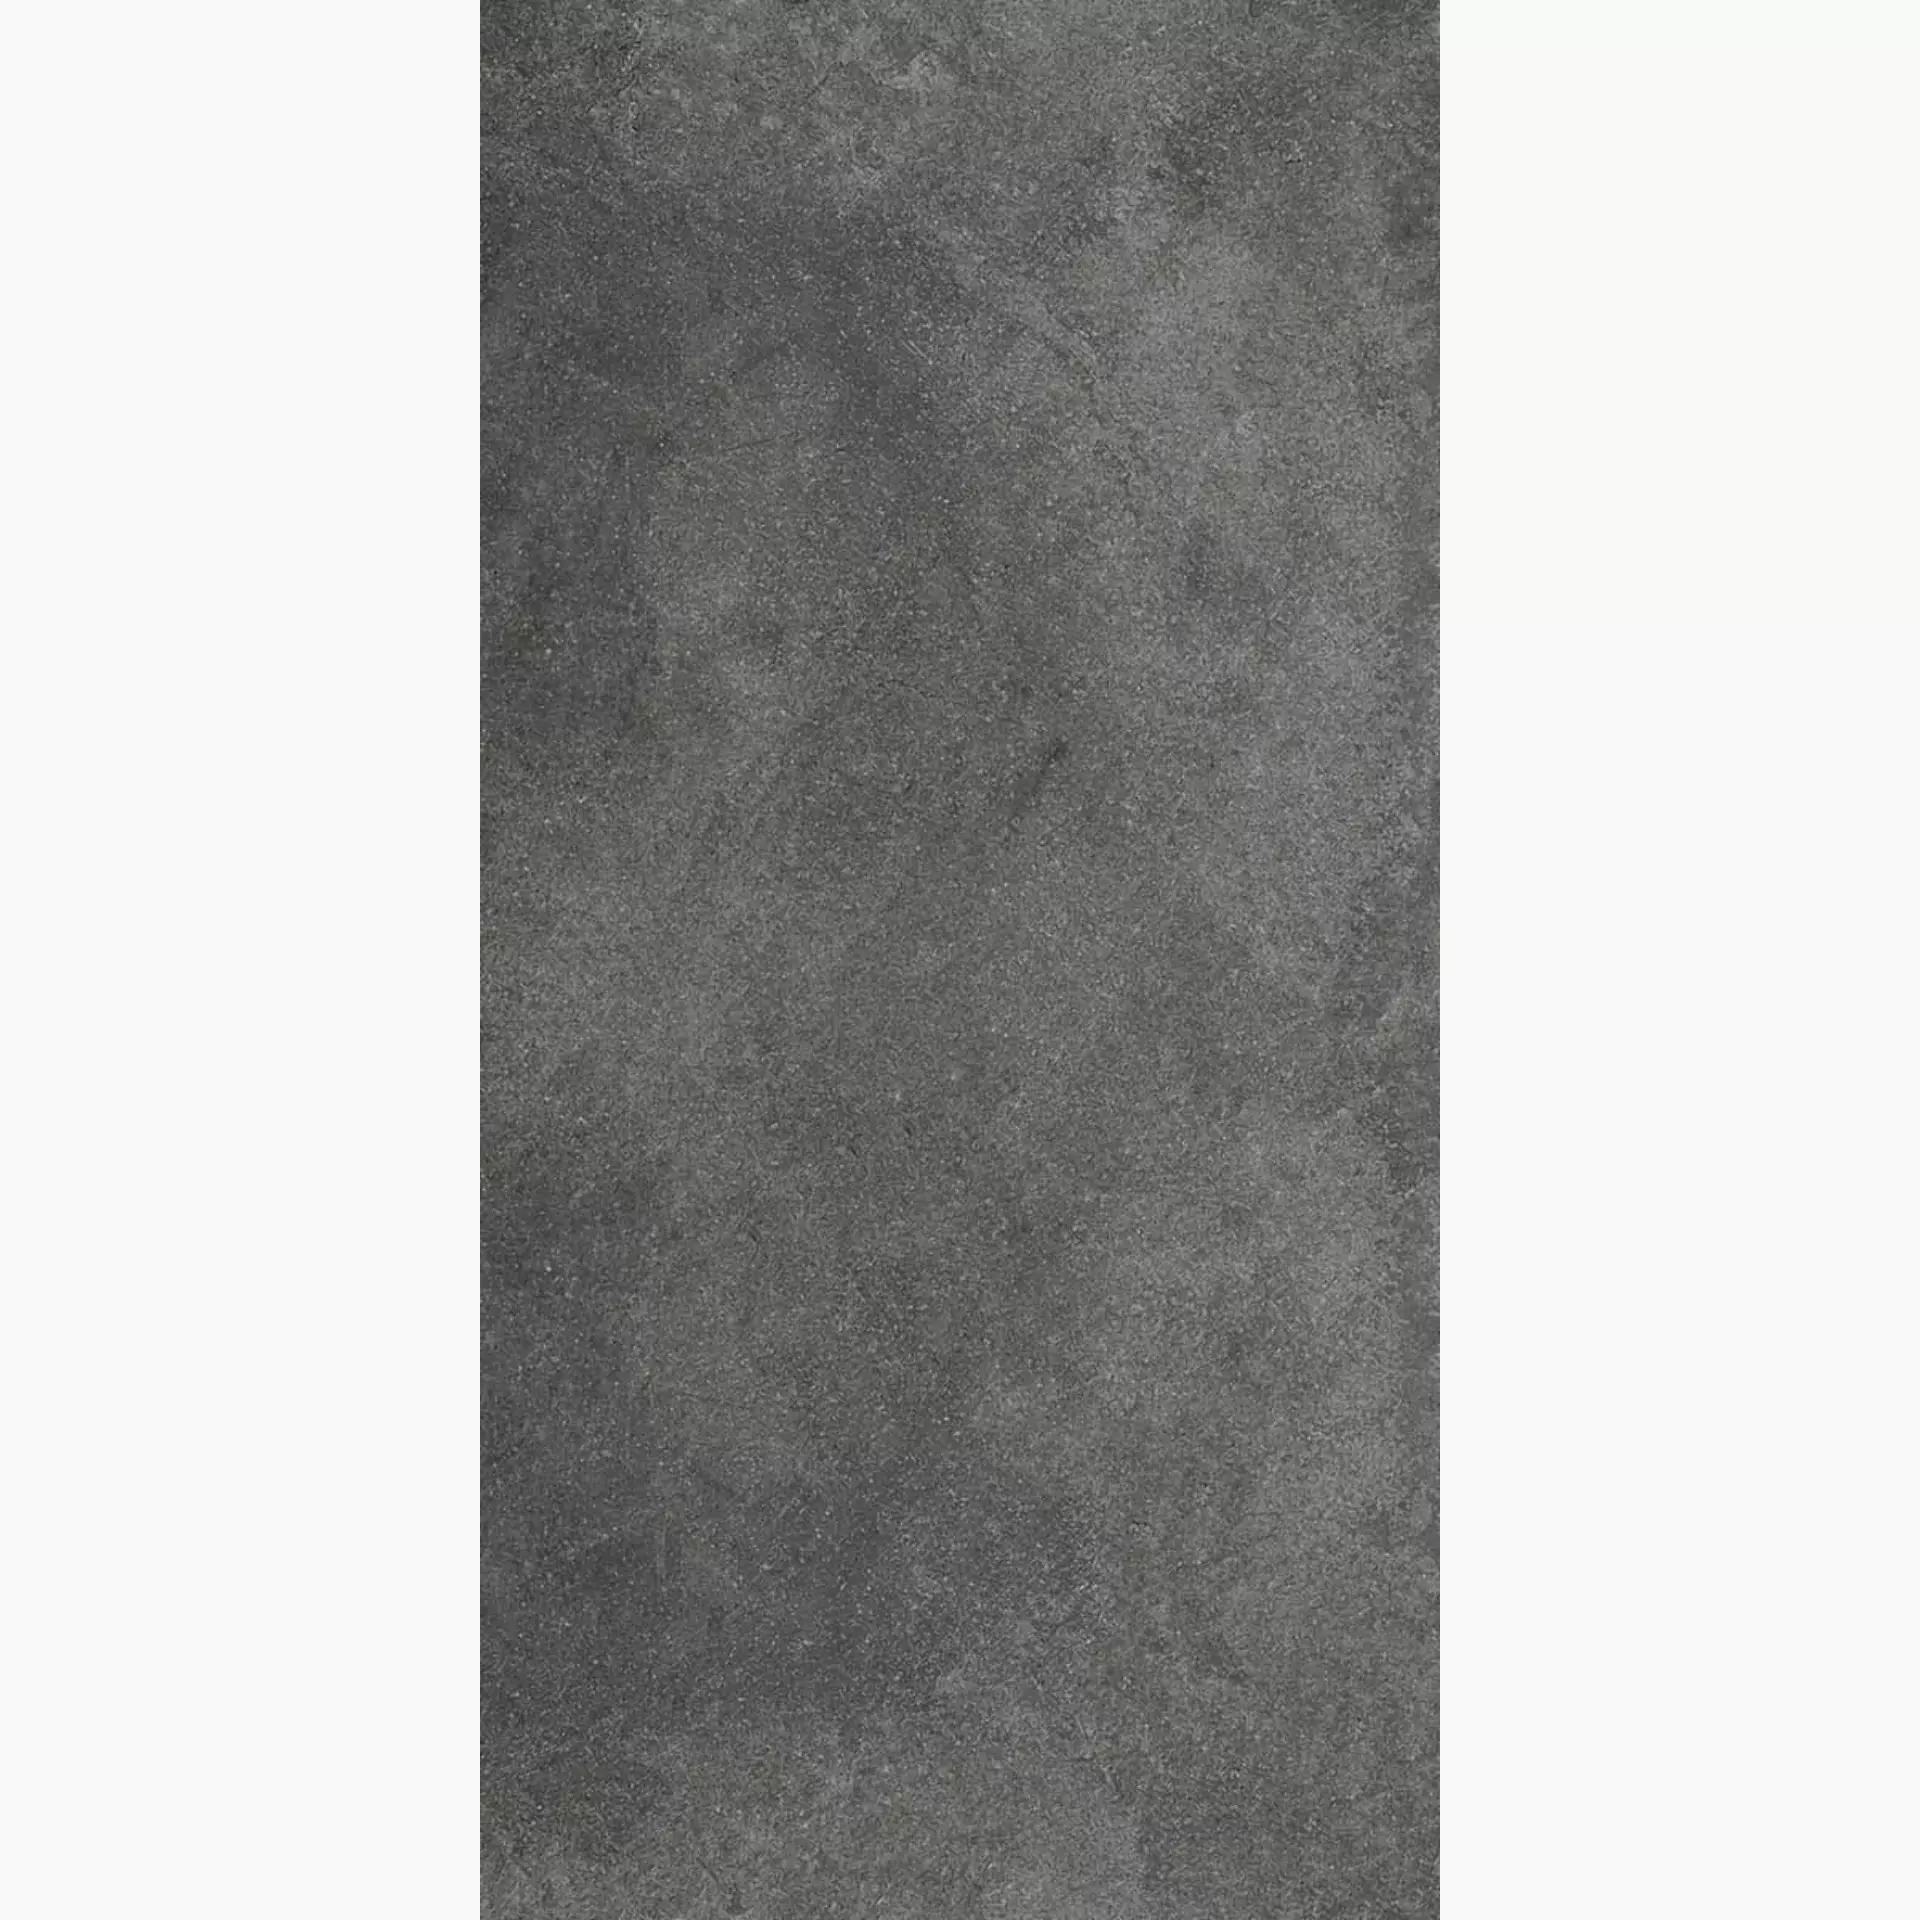 Keope Moov Anthracite Naturale – Matt 59383444 30x60cm rectified 9mm